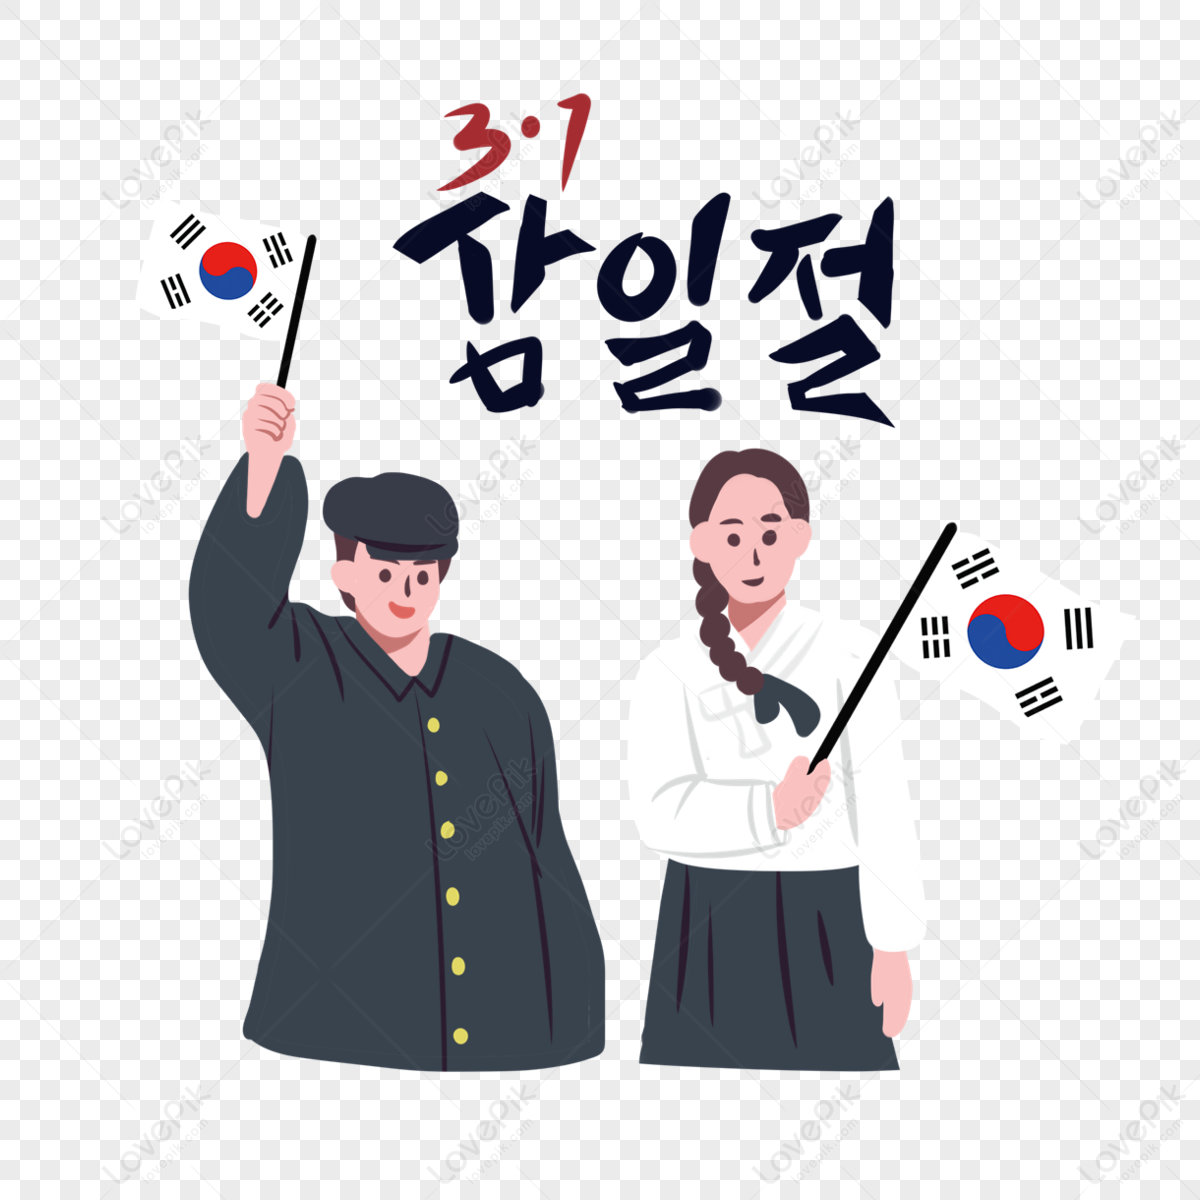 March First Movement of South Korea,korean march first movement figures,characters png hd transparent image